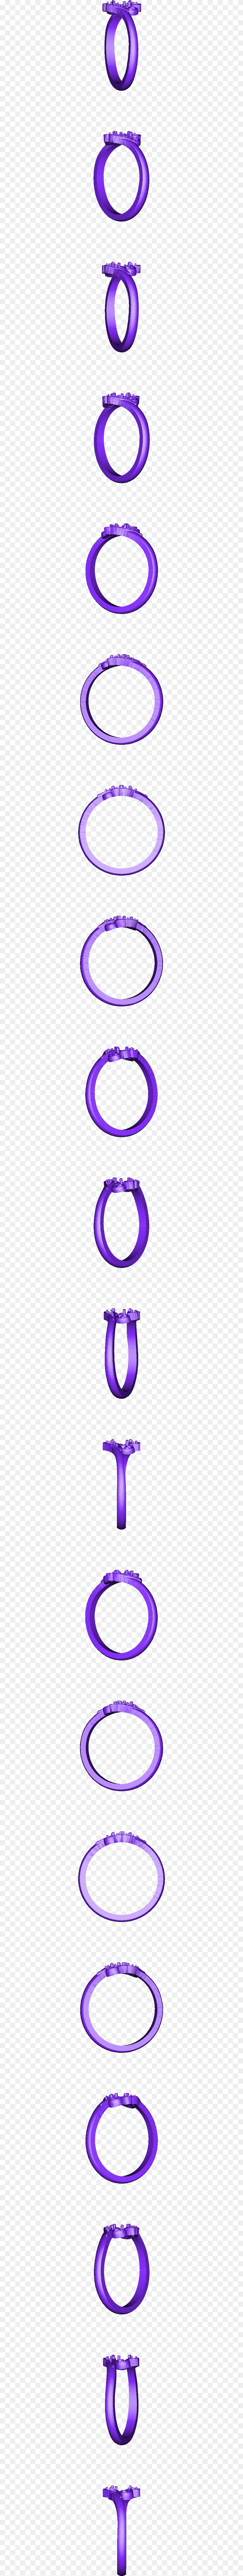 Circle, Coil, Purple, Spiral, Light Png